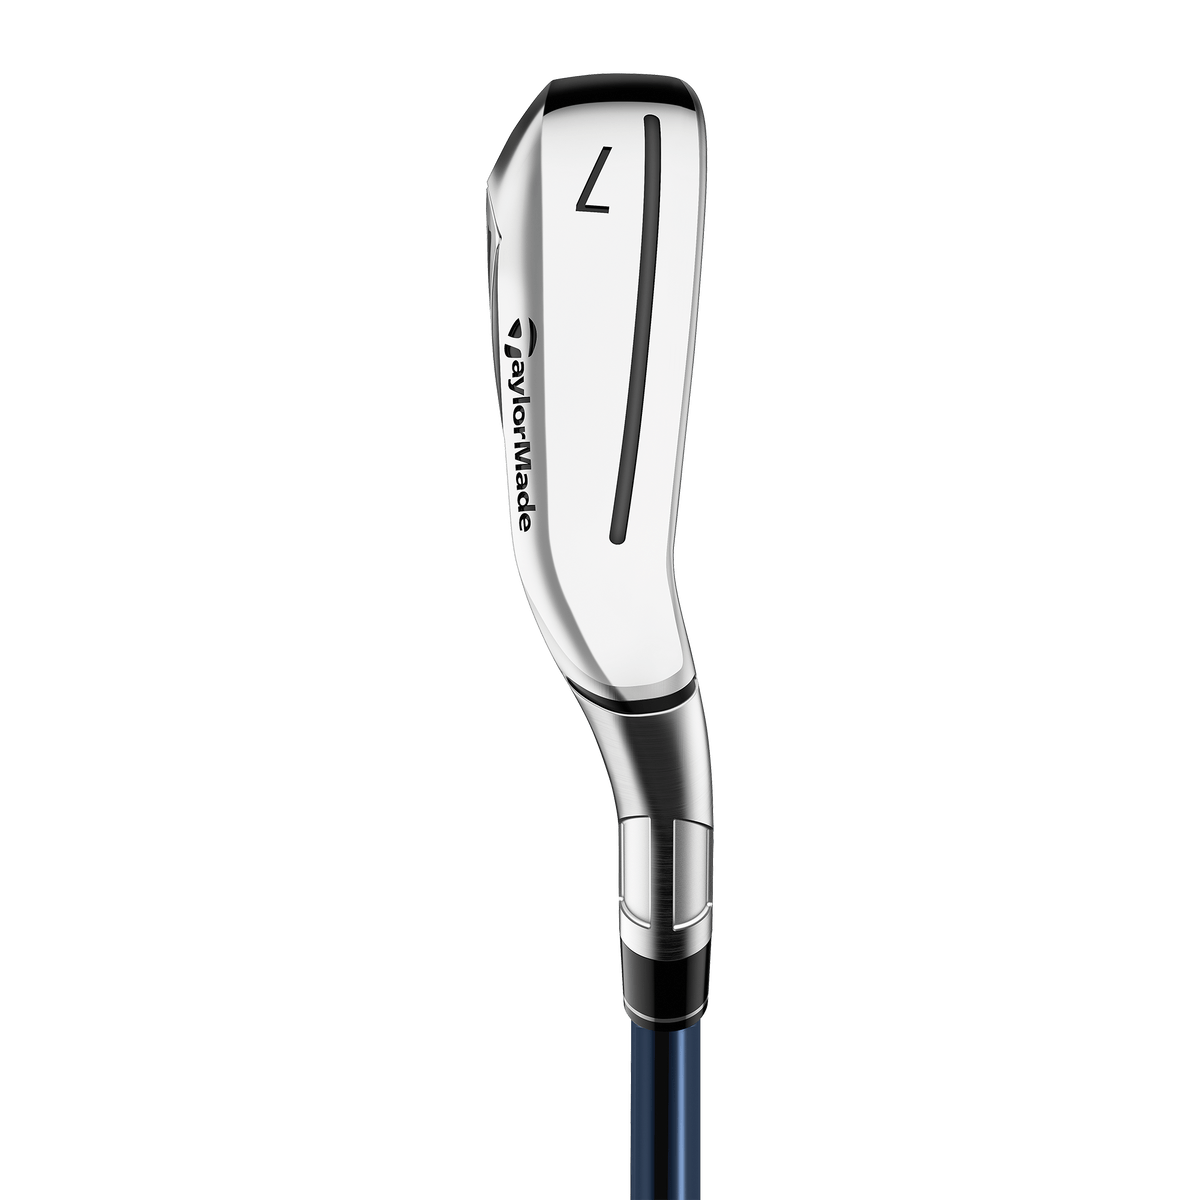 TaylorMade SIM2 Max OS Irons · Right handed · Graphite · Senior · 5-PW